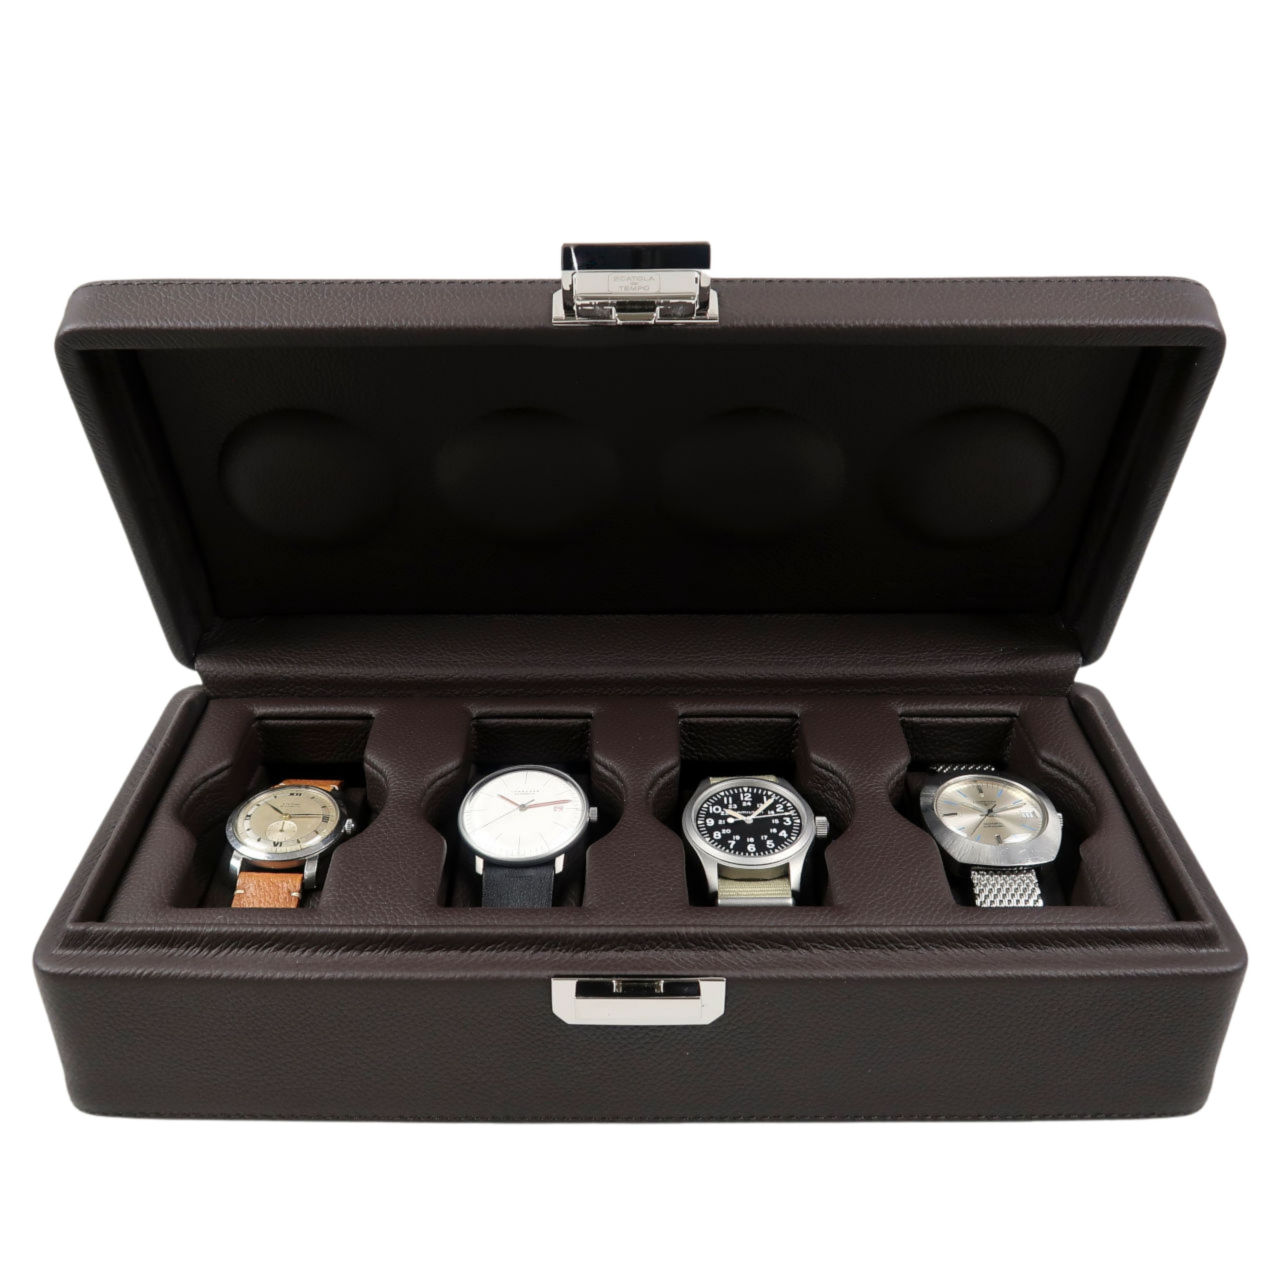 Scatola del Tempo Valigetta 4 Chocolate Brown Leather Watch Case for Four Watches